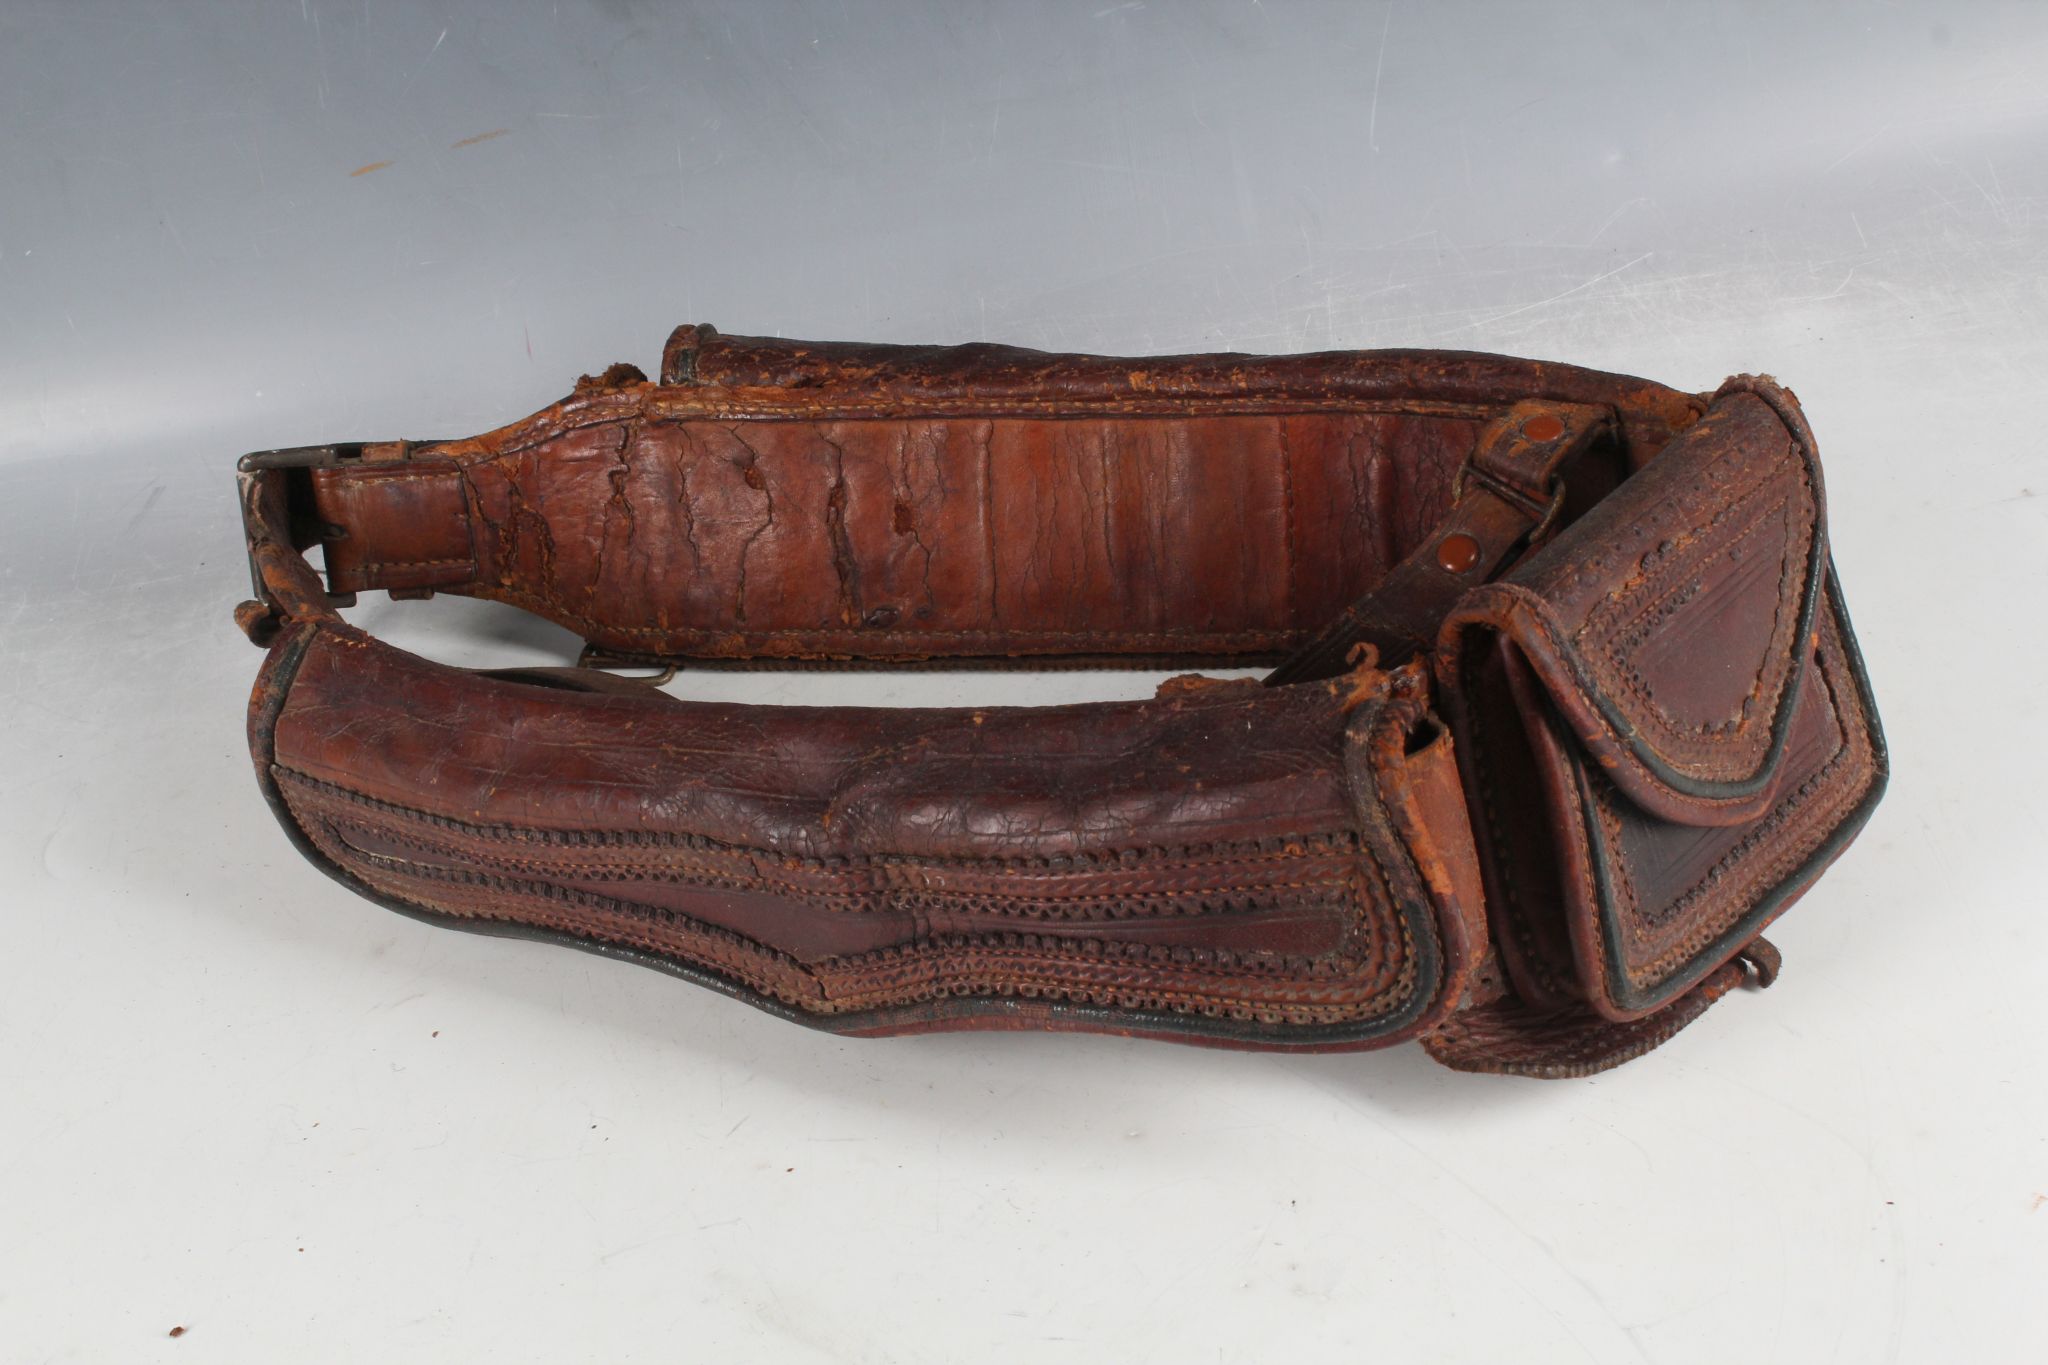 A Mexican hand stitched shot gun cartridge belt, 26 shots with leather weather flap and central